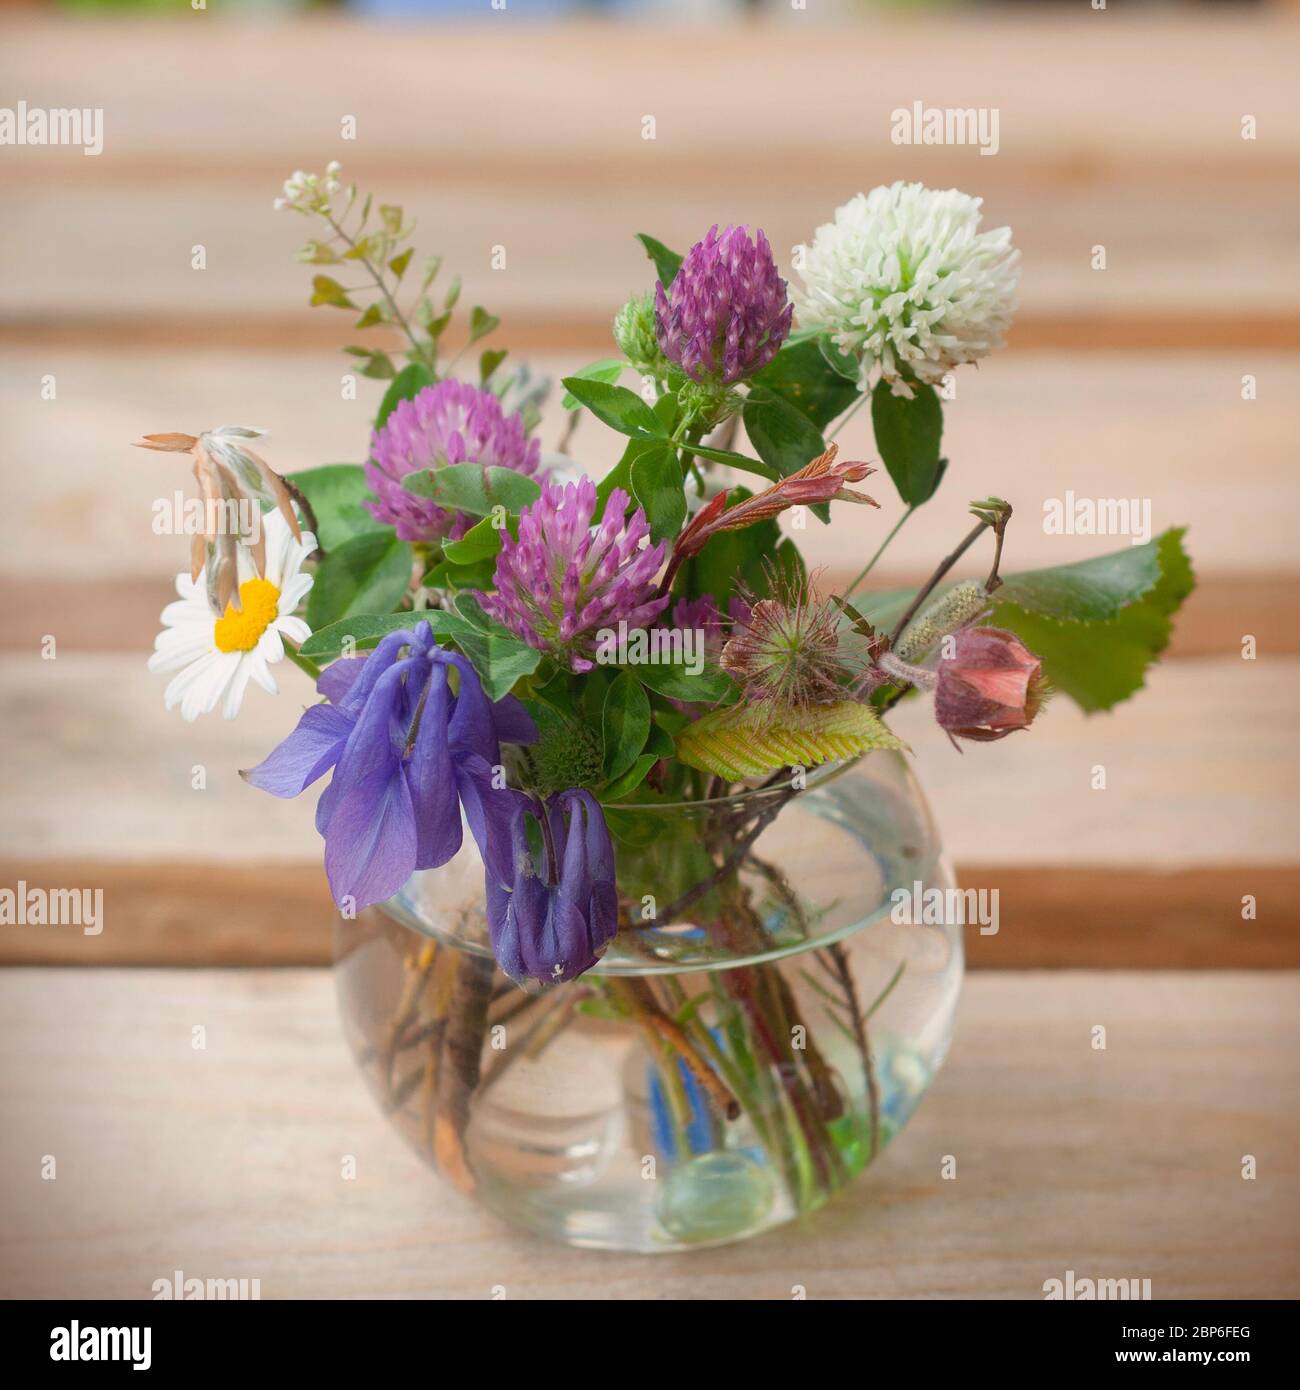 Beautiful bouquet of spring flowers: camomile, Aquilegia Vulgaris, Trifolium isolated on wooden background Stock Photo